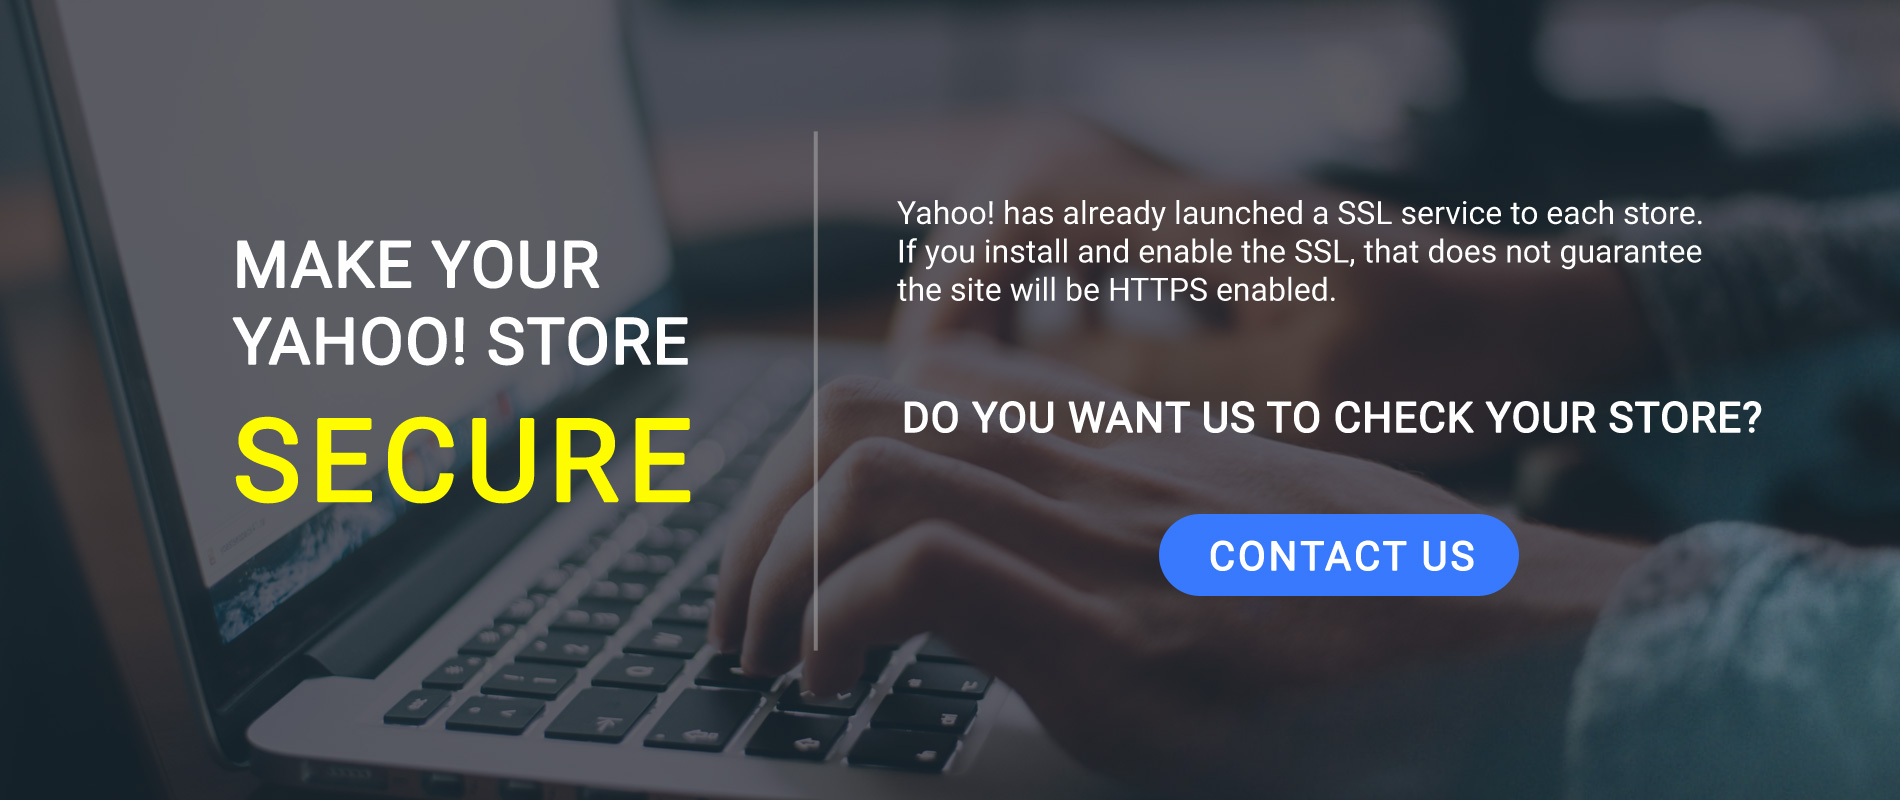 Make your Yahoo Store Secure